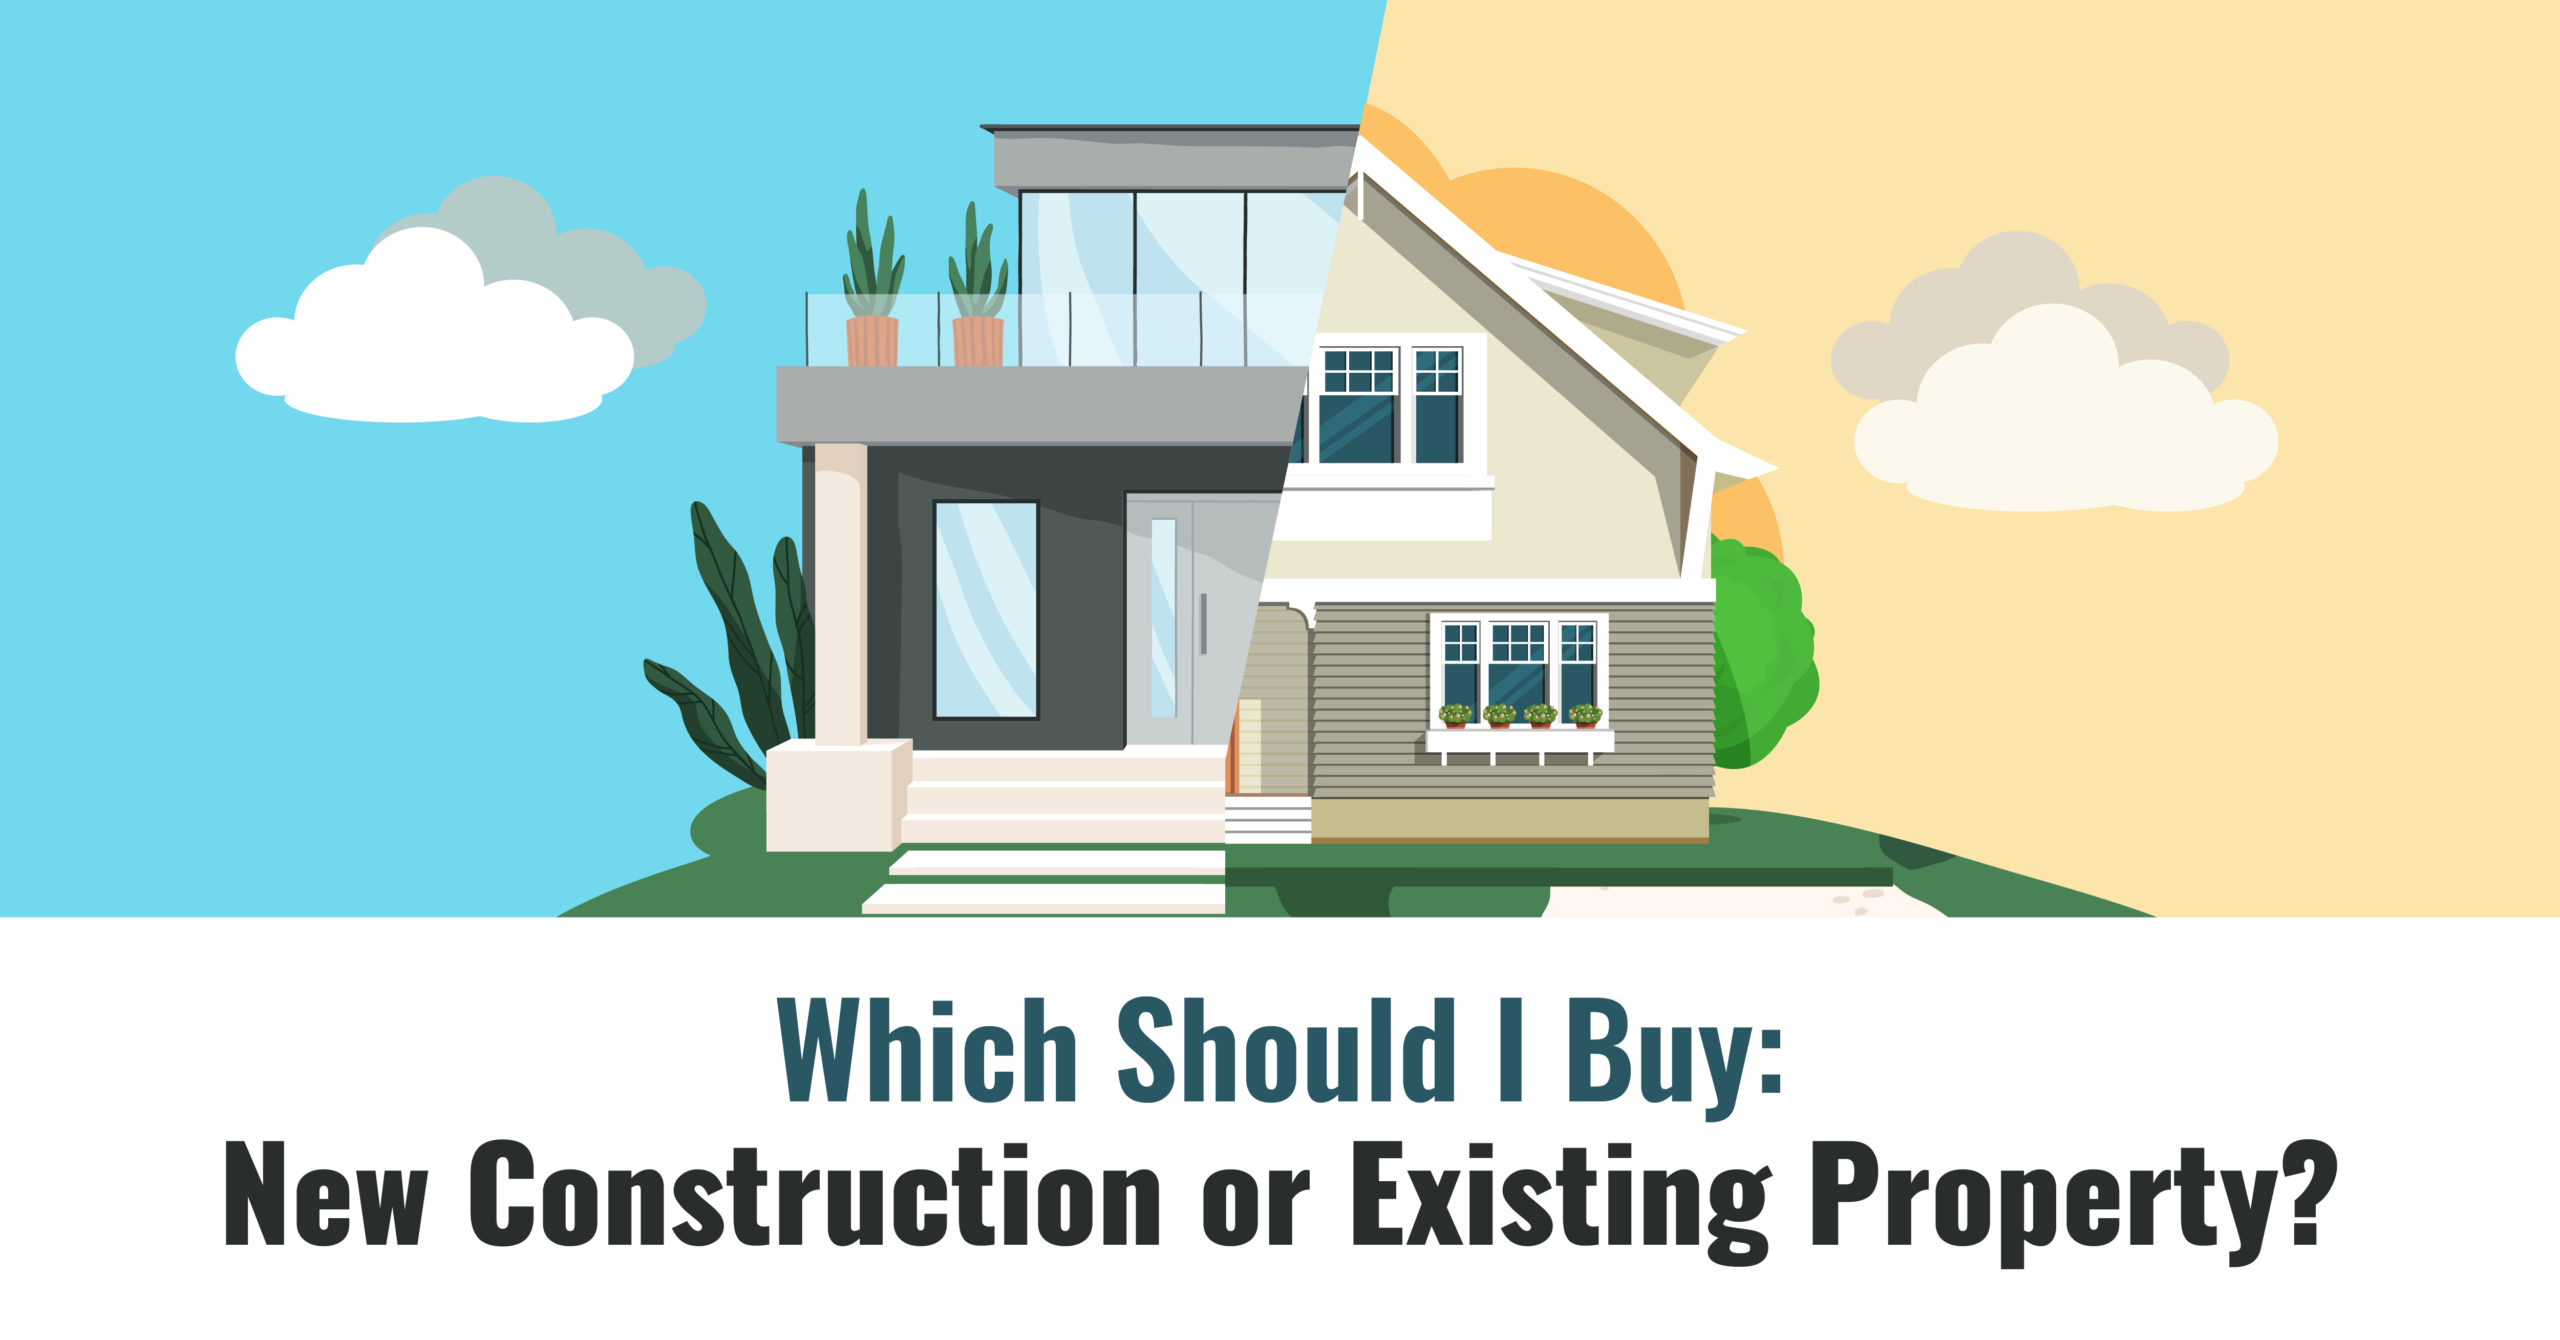 Which Should I Buy: New Construction or Existing Property?